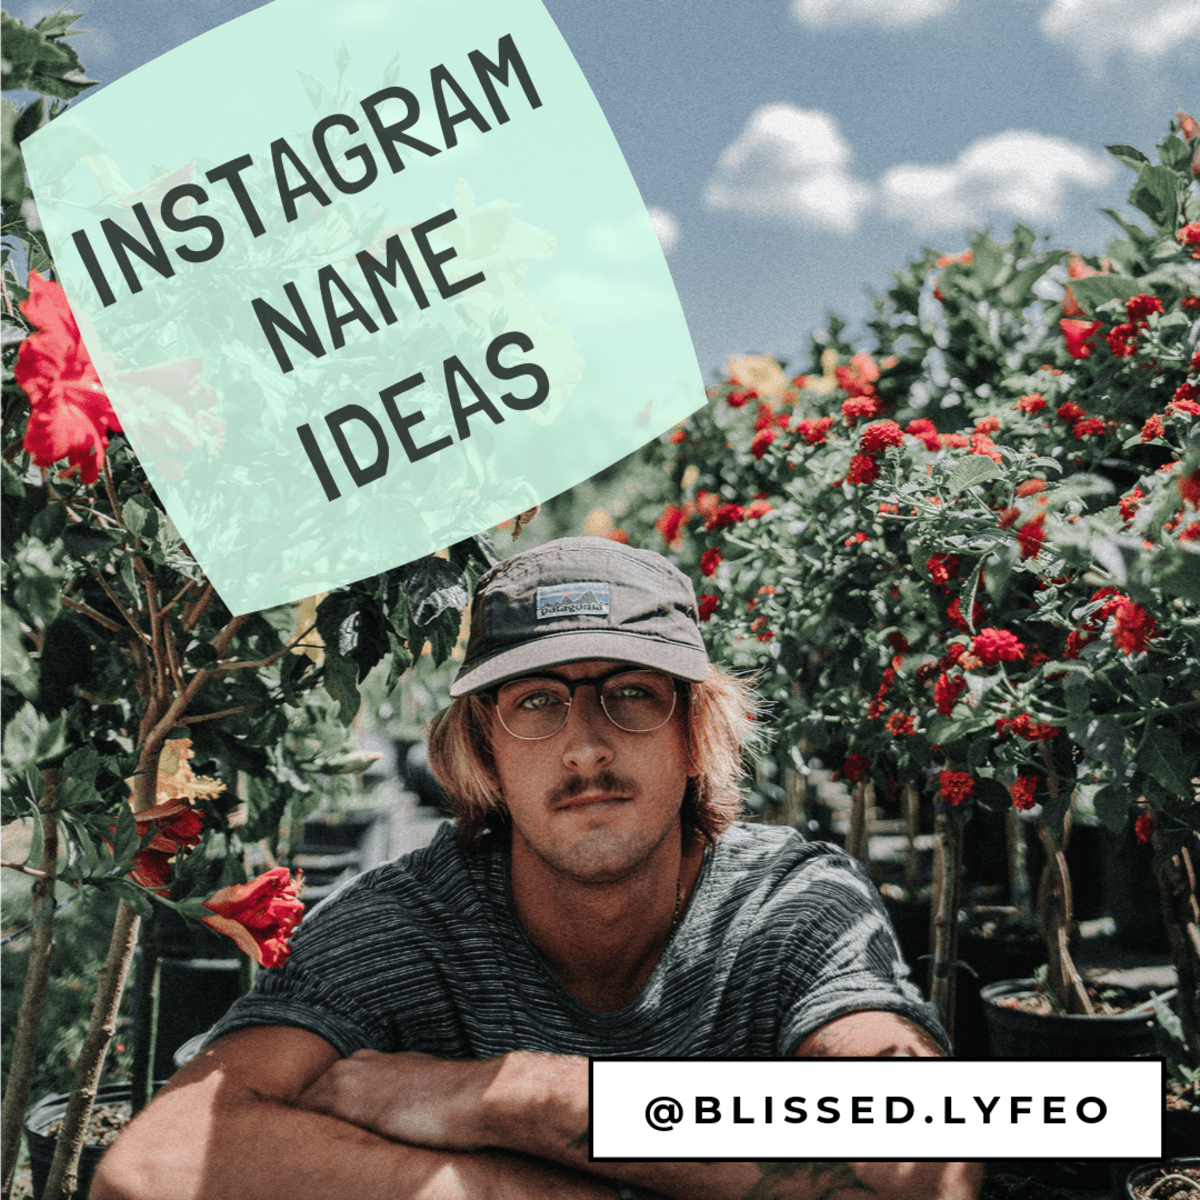 200 Creative Instagram Name Ideas And Handles For Insta Fame Turbofuture